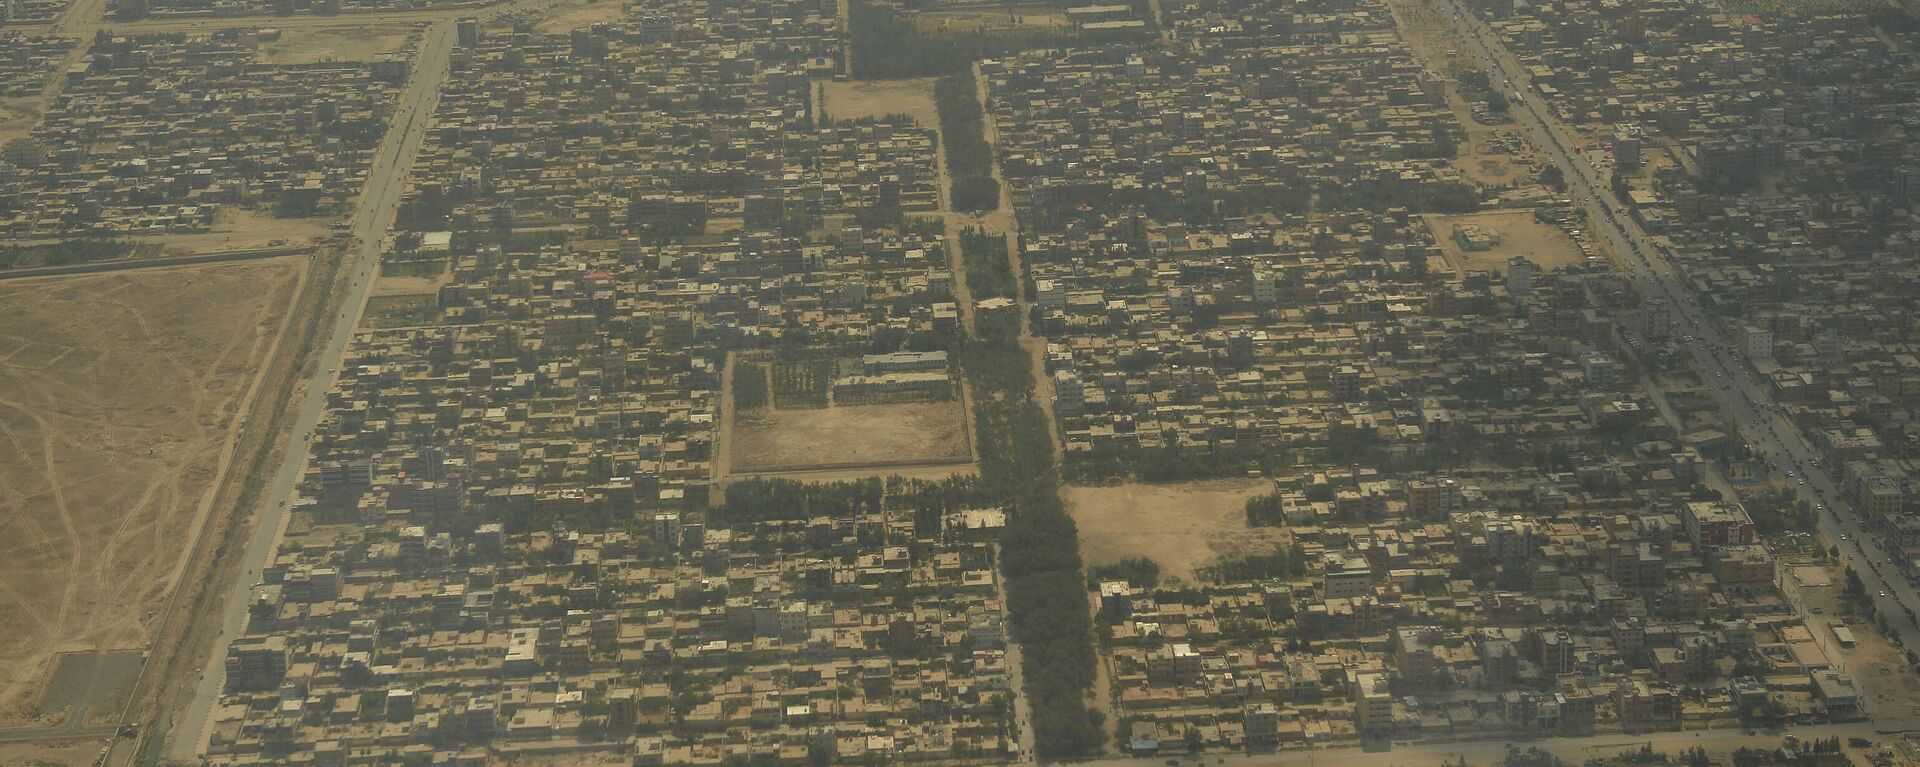 A general view of residential areas as seen from the window of a passenger aircraft flying over Kabul on September 22, 2021. - Sputnik International, 1920, 31.07.2022